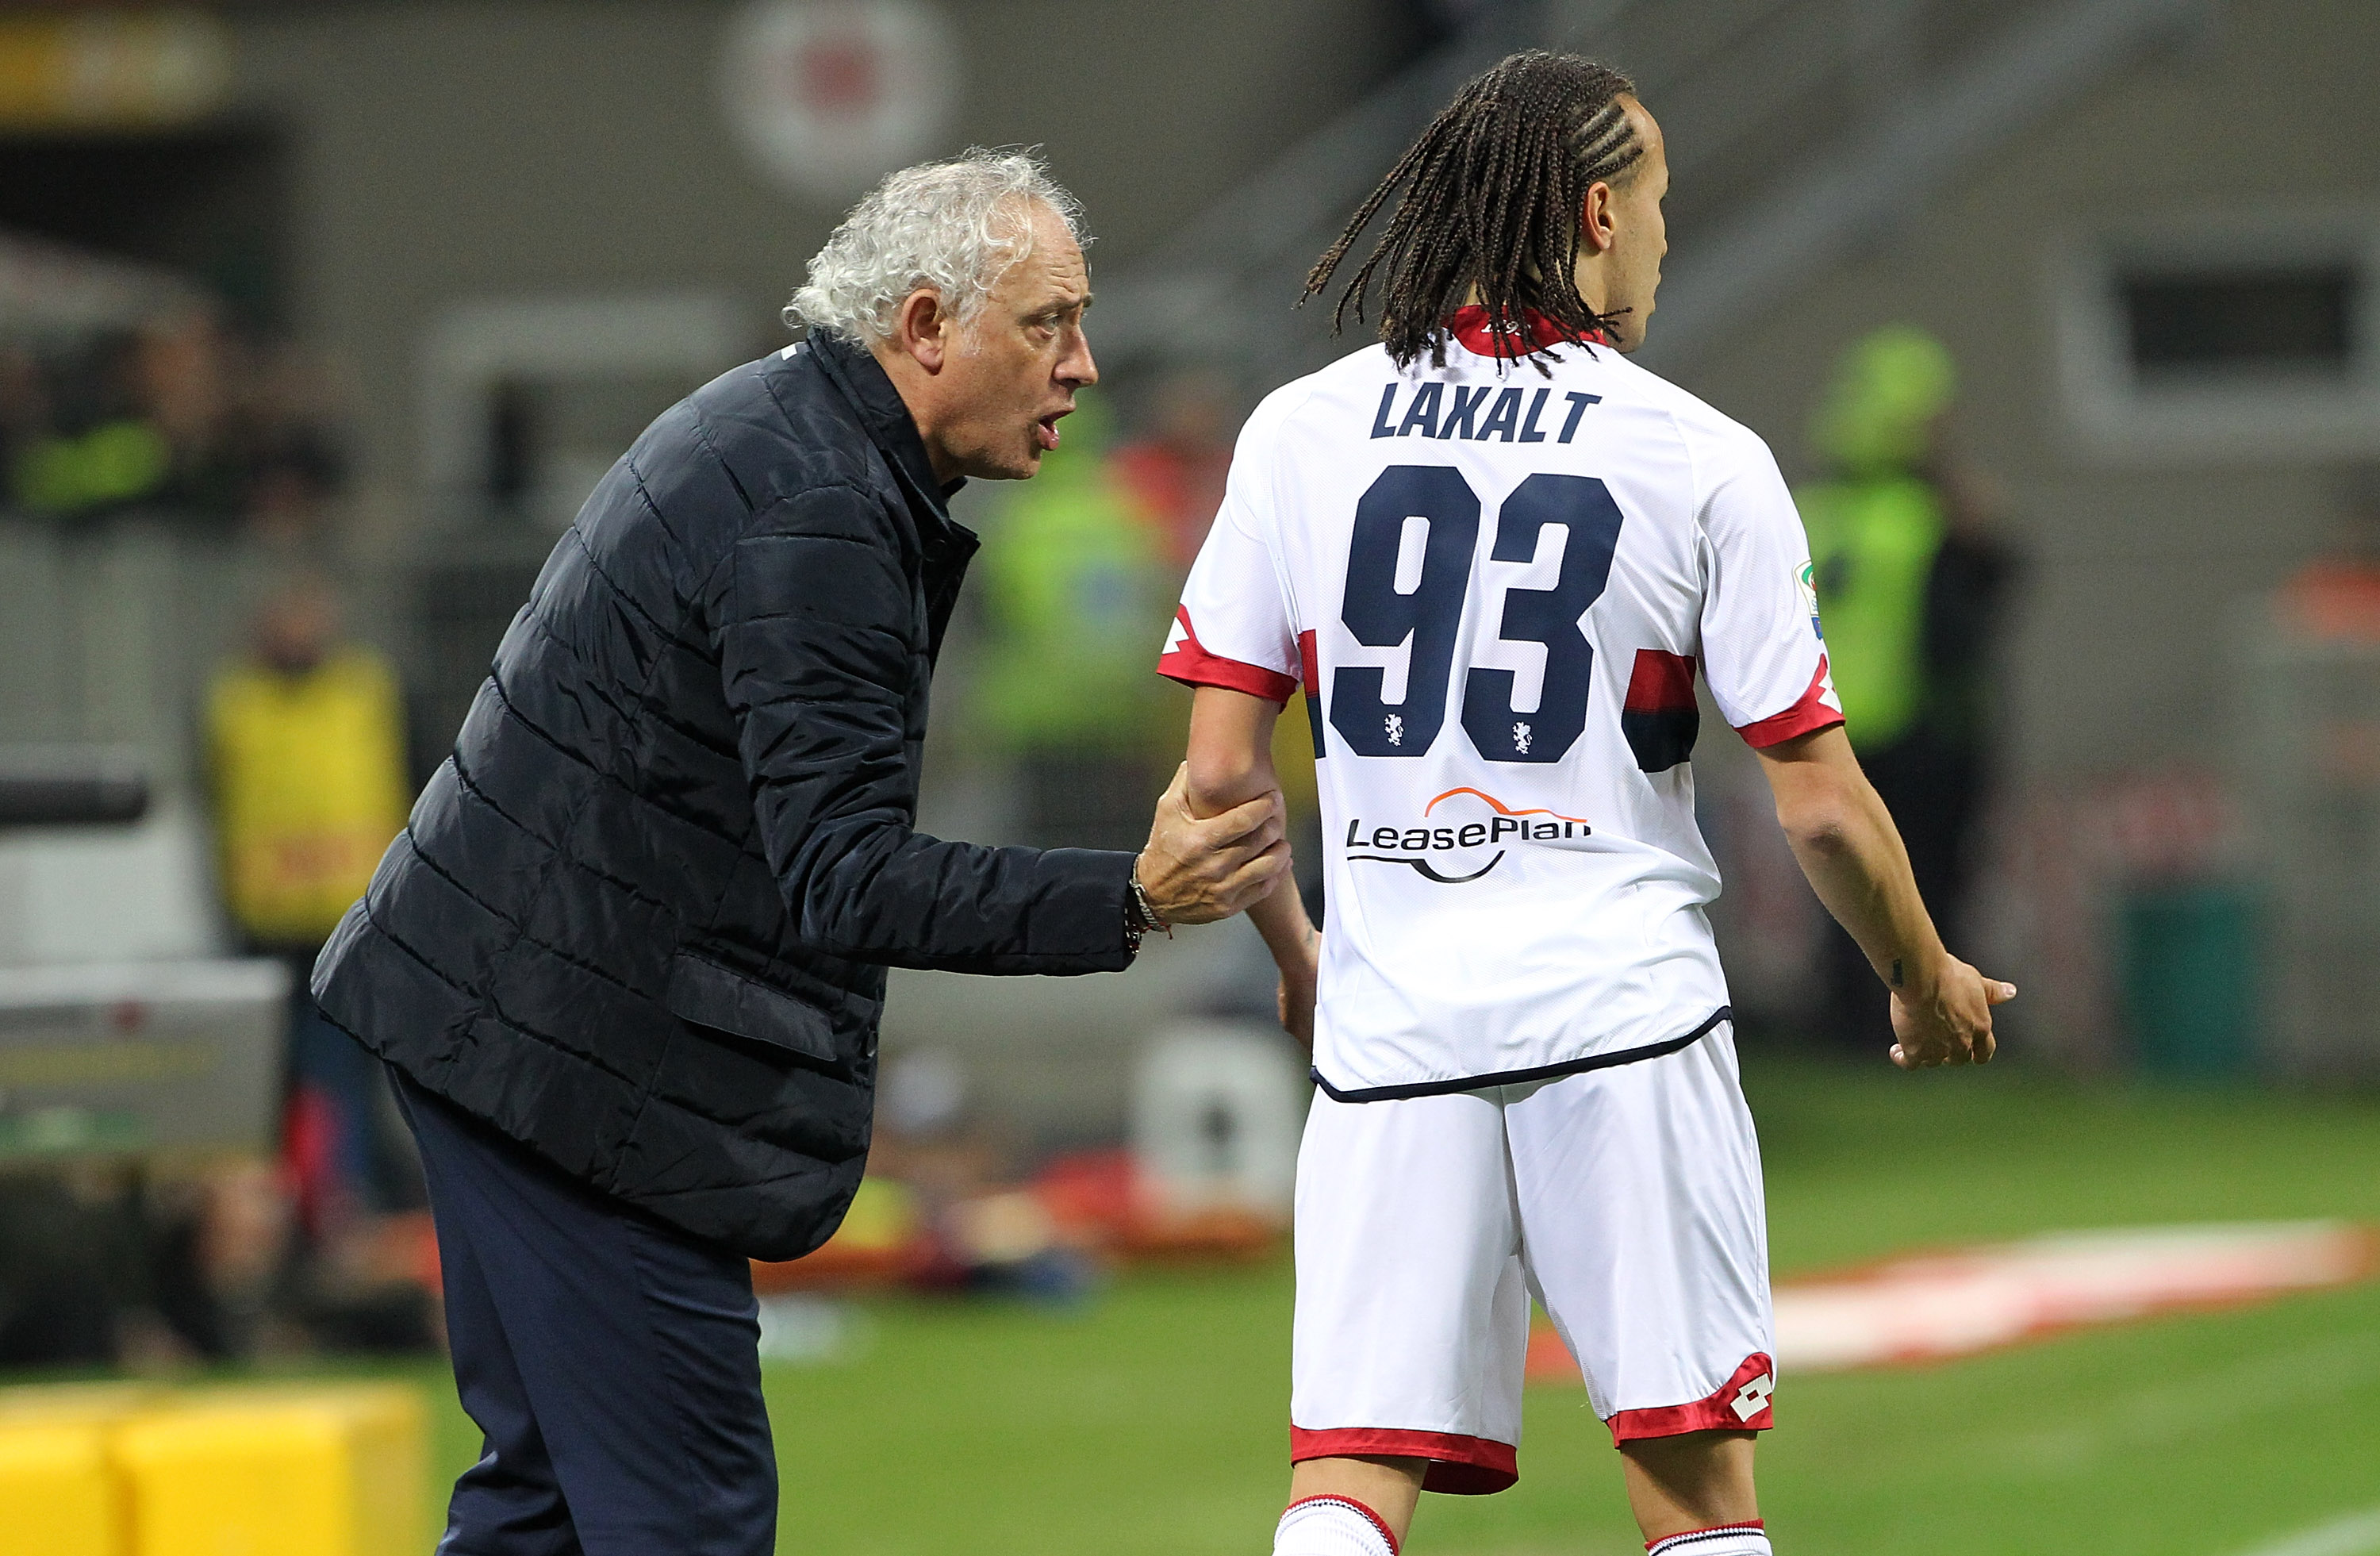 MILAN, ITALY - MARCH 18:  Genoa CFC coach Andrea Mandorlini issues instructions to his player Diego Laxalt during the Serie A match between AC Milan and Genoa CFC at Stadio Giuseppe Meazza on March 18, 2017 in Milan, Italy.  (Photo by Marco Luzzani/Getty Images)